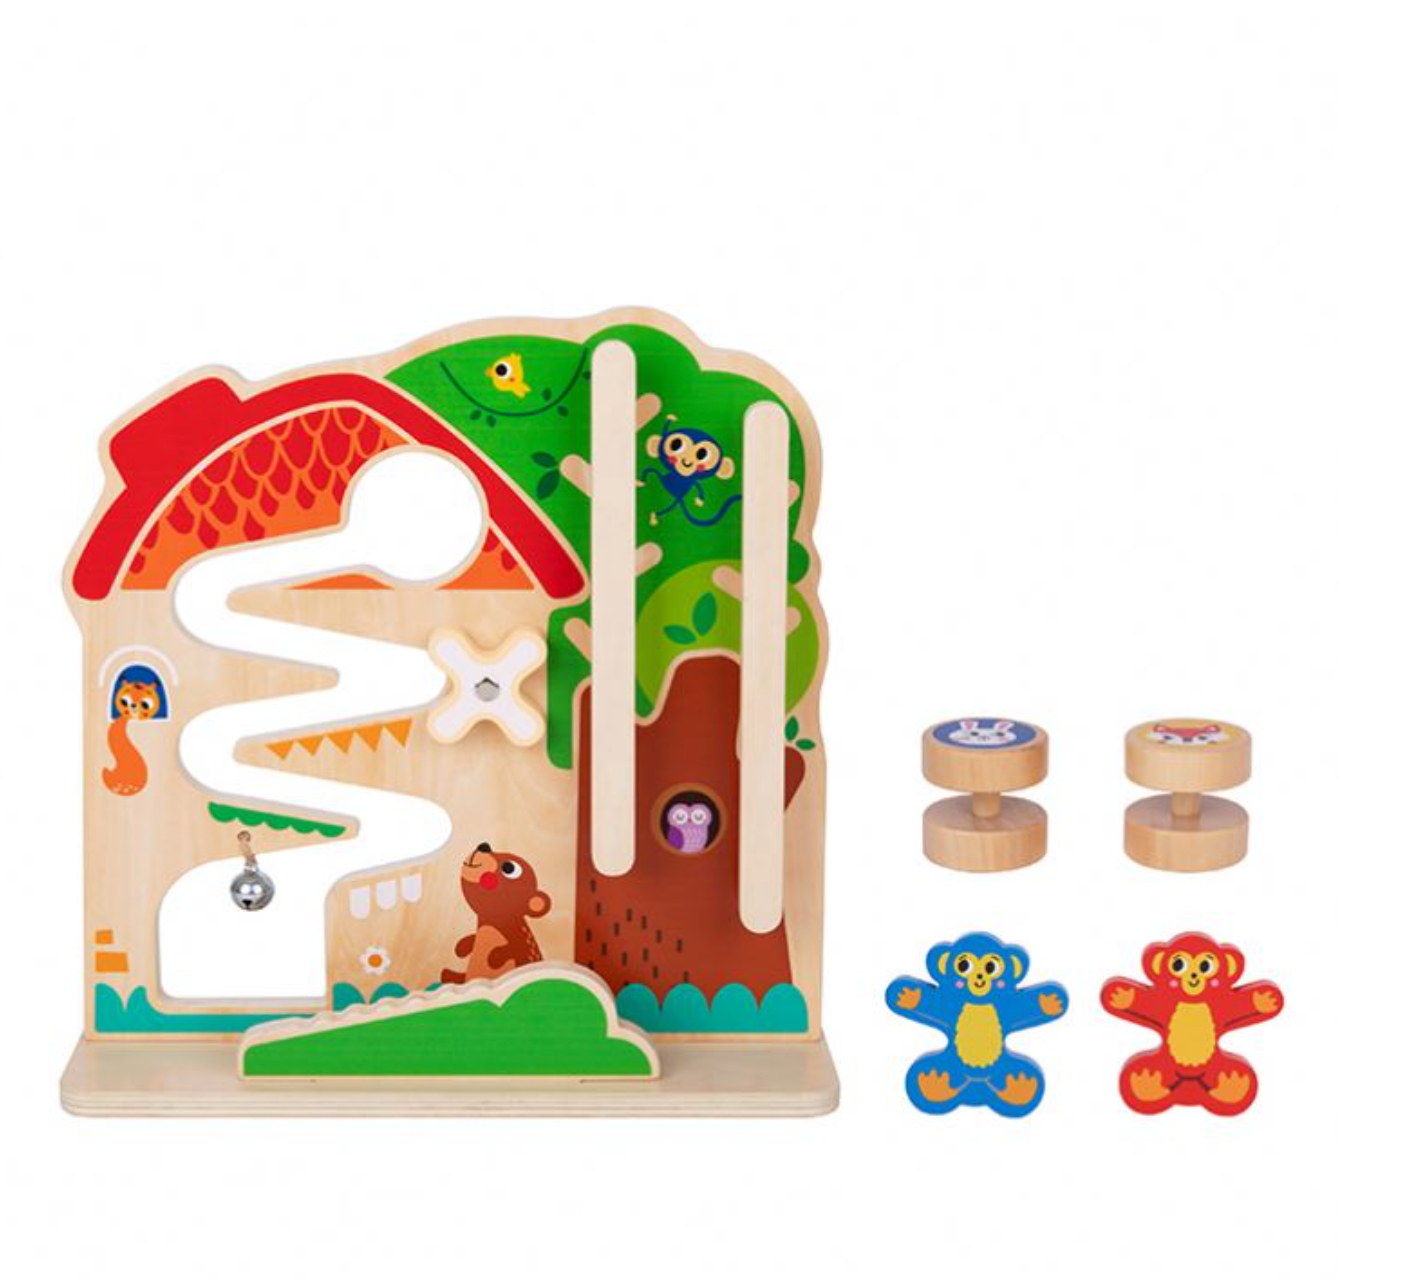 Tooky Toy 2 In 1 Activity Ball Track